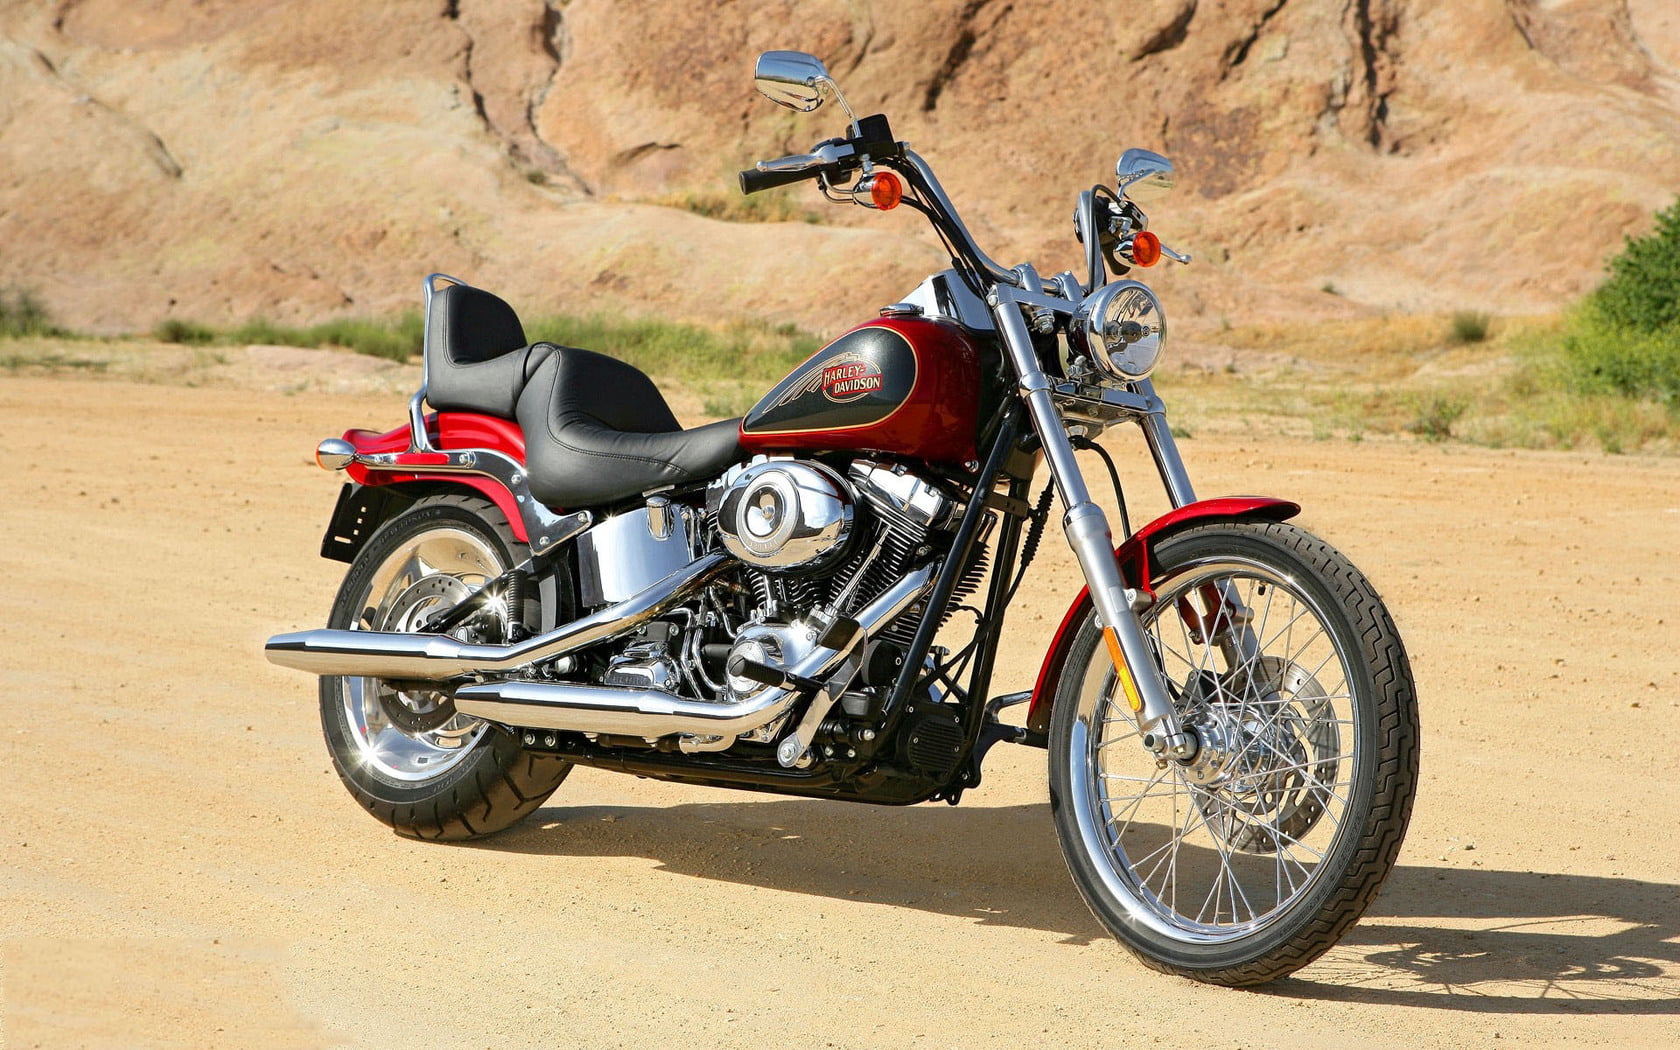 Harley Davidson FXSTC Softail Custom, red and black cruiser motorcycle